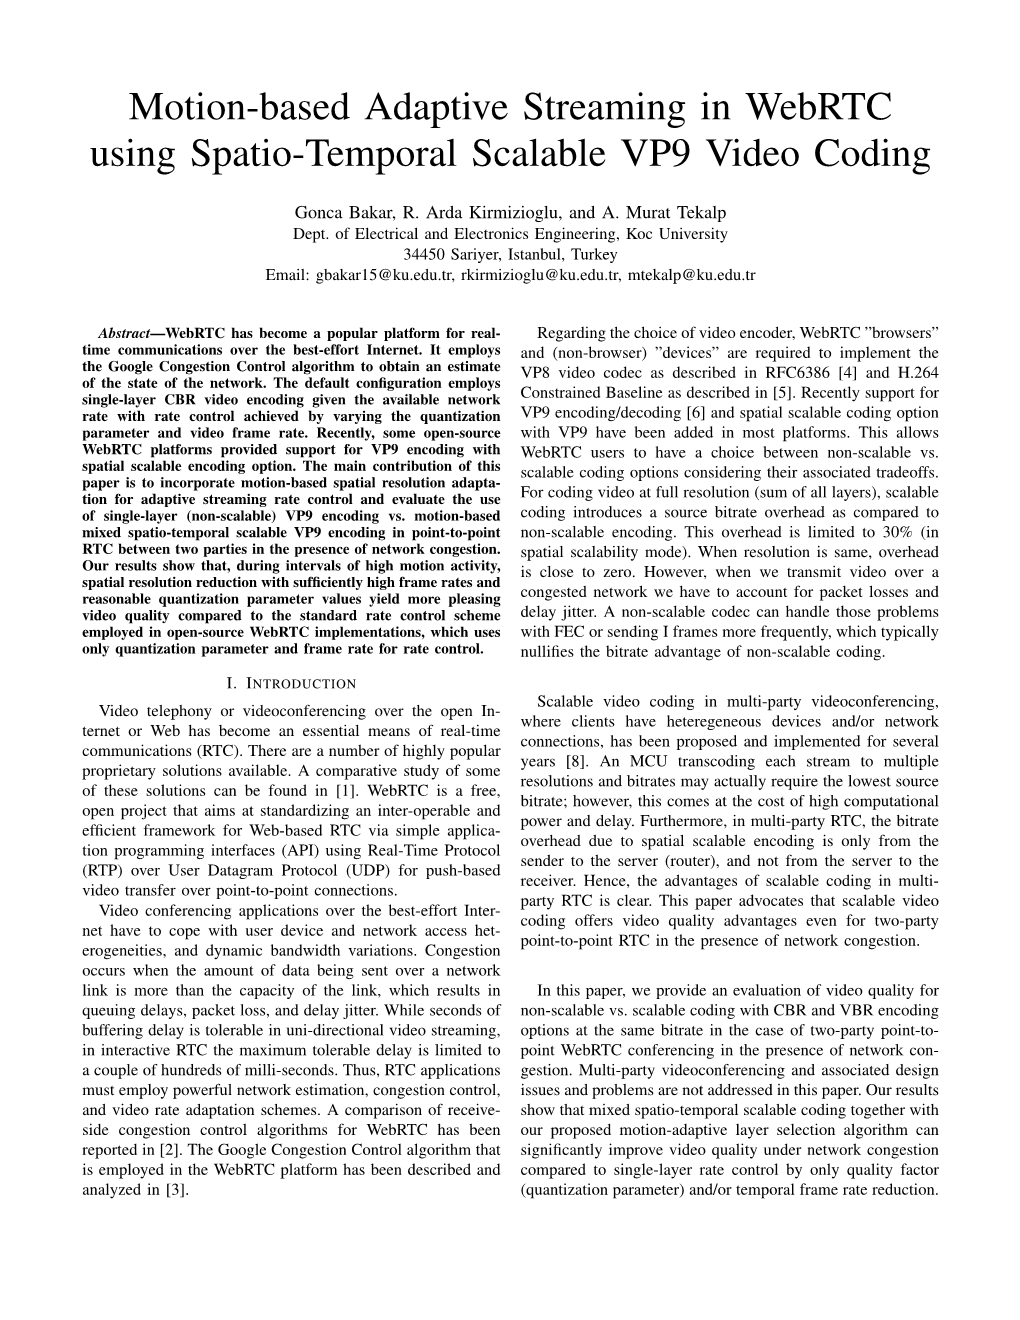 Motion-Based Adaptive Streaming in Webrtc Using Spatio-Temporal Scalable VP9 Video Coding